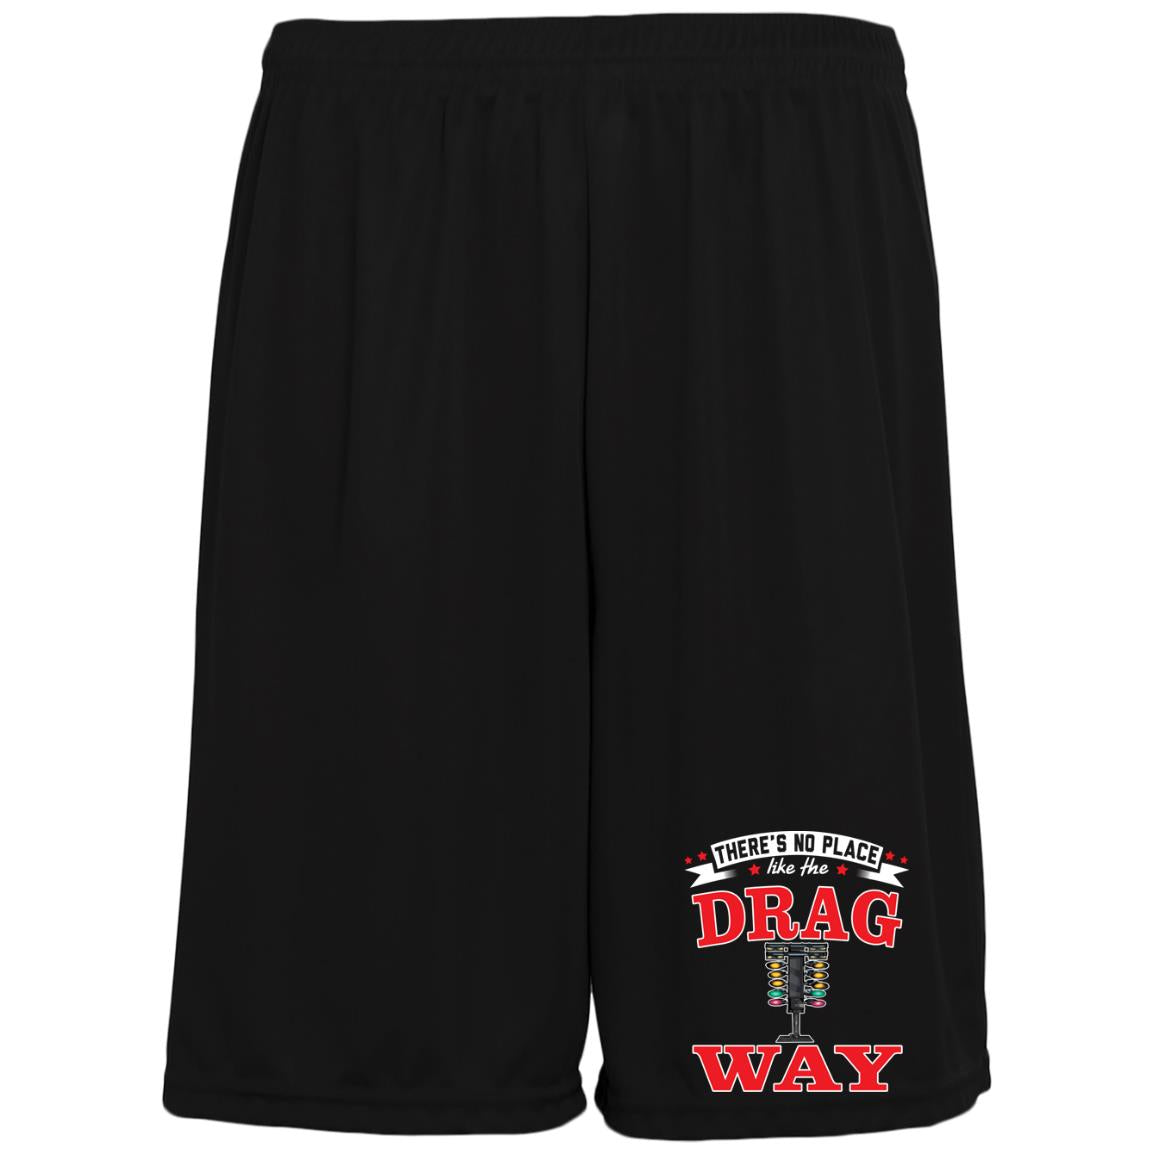 There's No Place Like The Dragway Moisture-Wicking Pocketed 9 inch Inseam Training Shorts